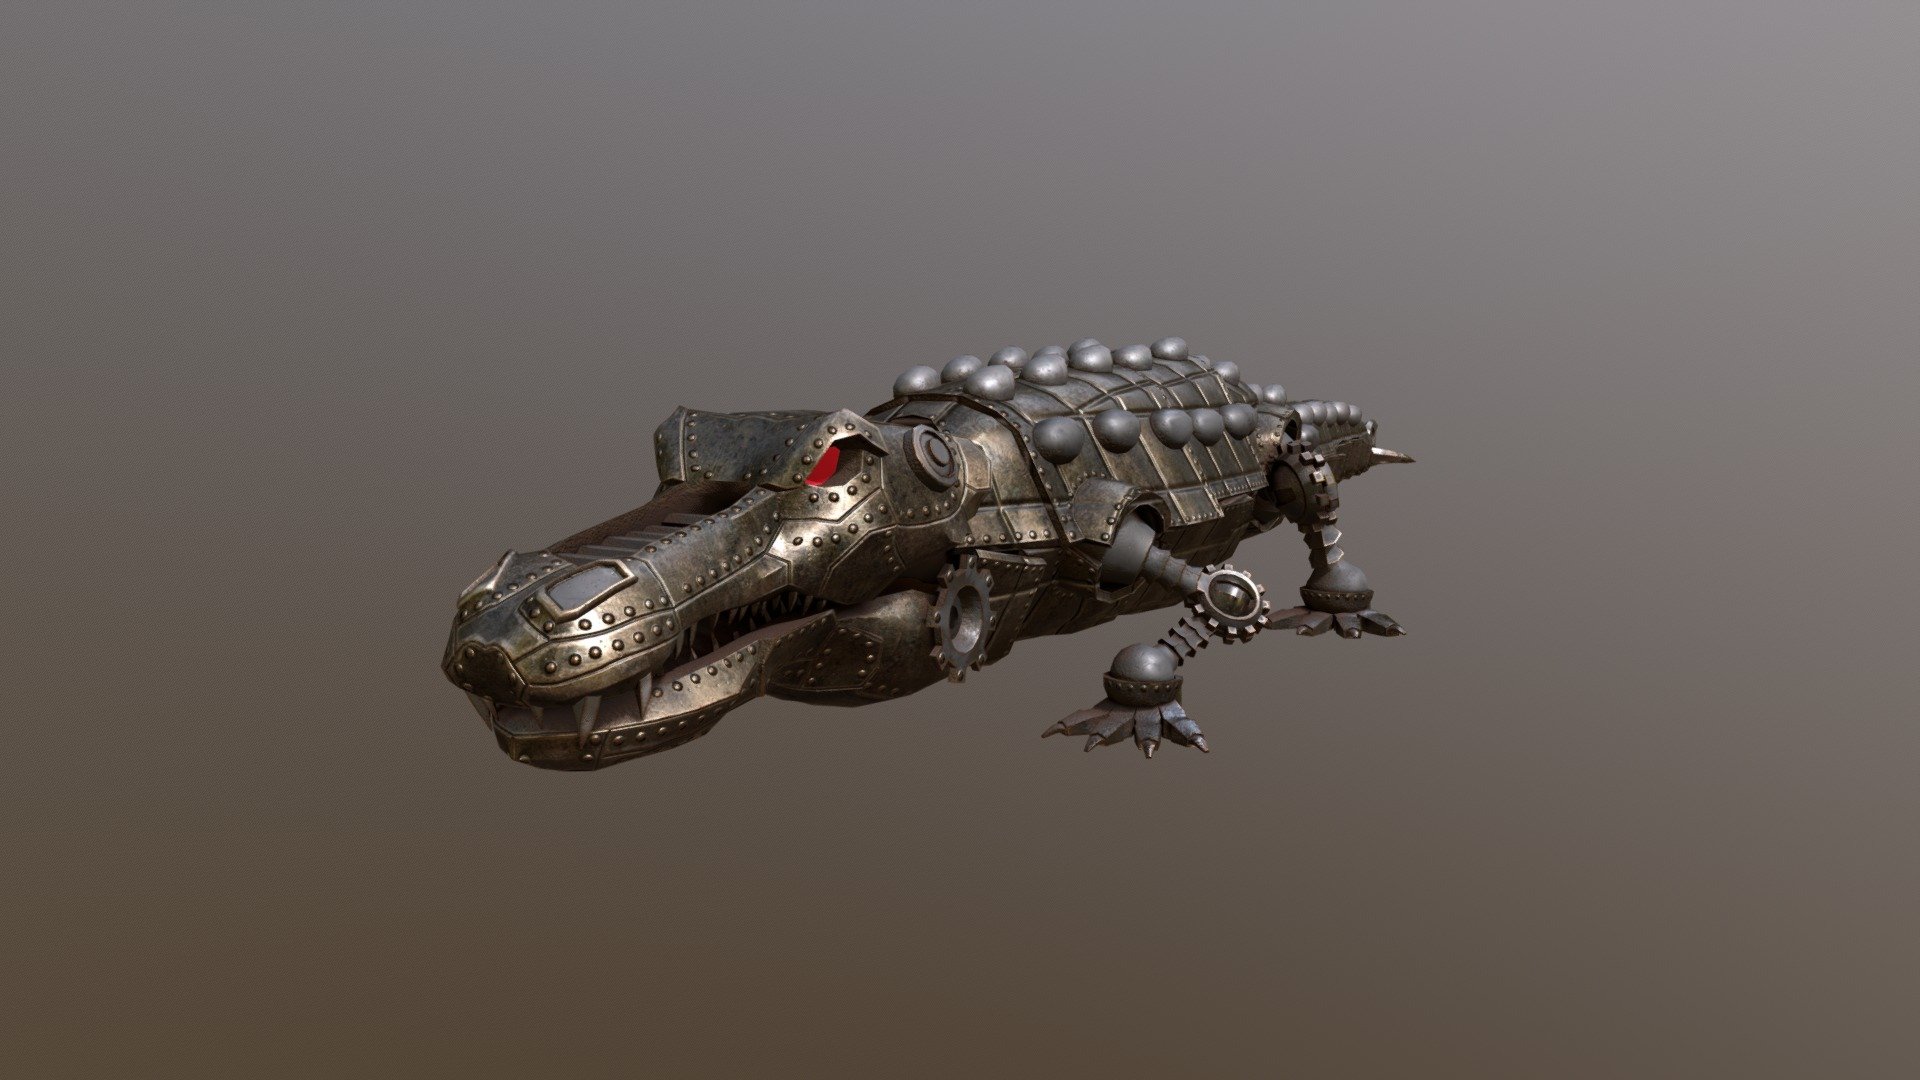 Steampunk Croco for the game “Darco - Reign of Elements” 

Now on Steam of
TP Studios

Model by me

Texture by Monsterlutz - Steampunk Croco Model - 3D model by Anakaii 3d model